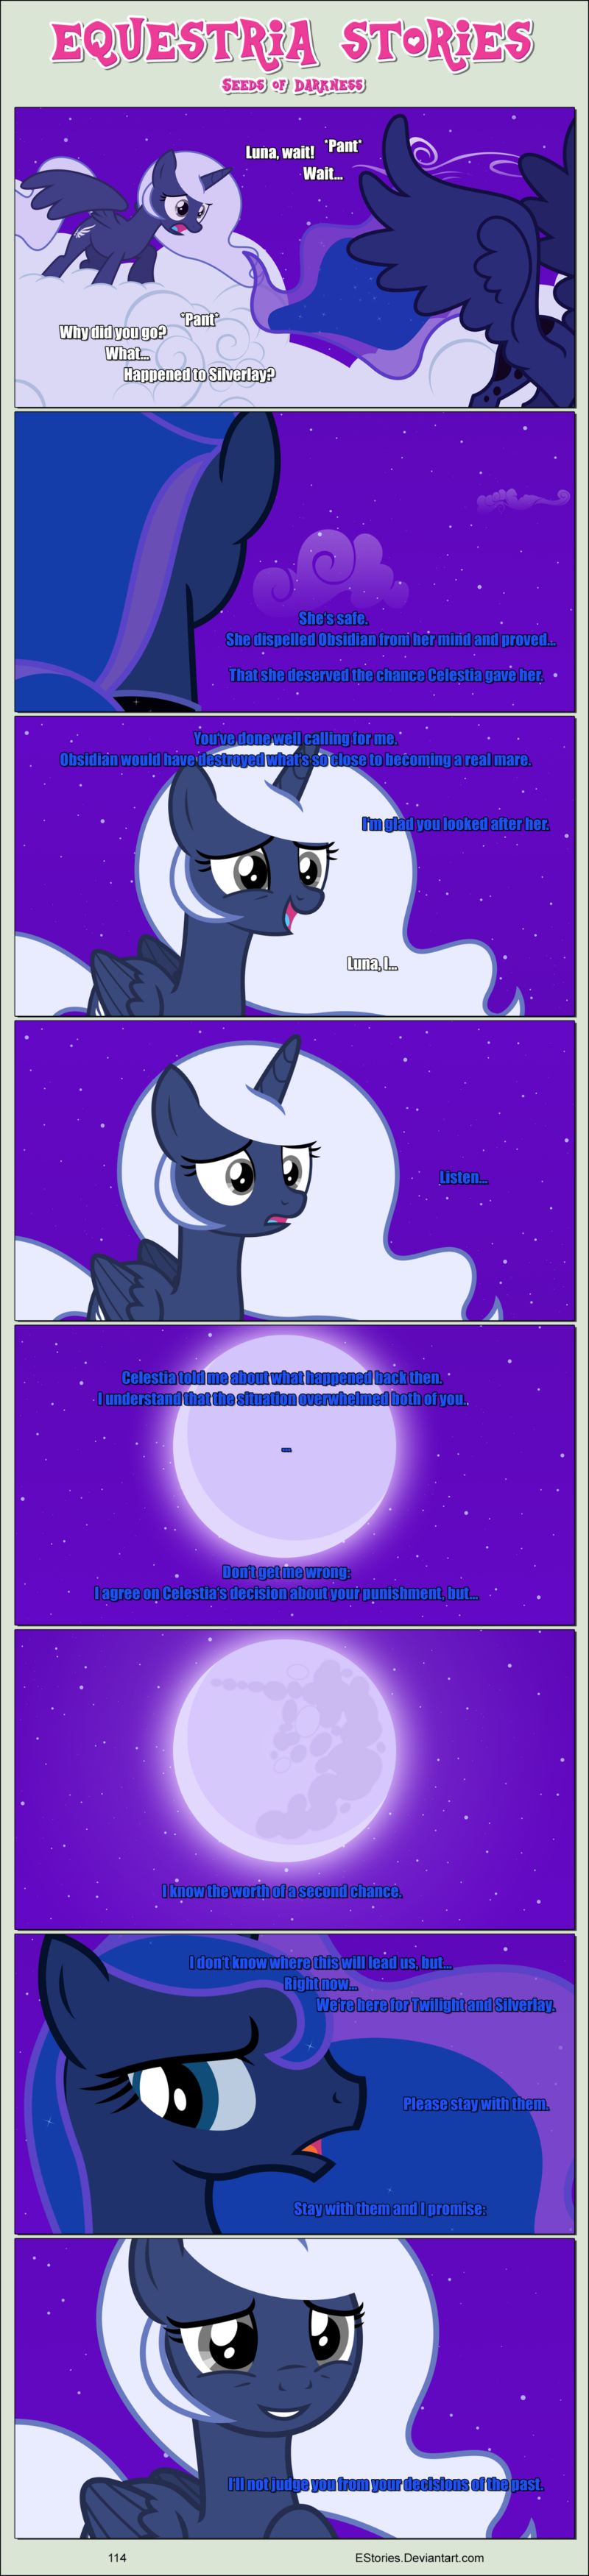 Seeds of darkness - Chapter 2 / Pages 111 - 120 - Canterlot Comics